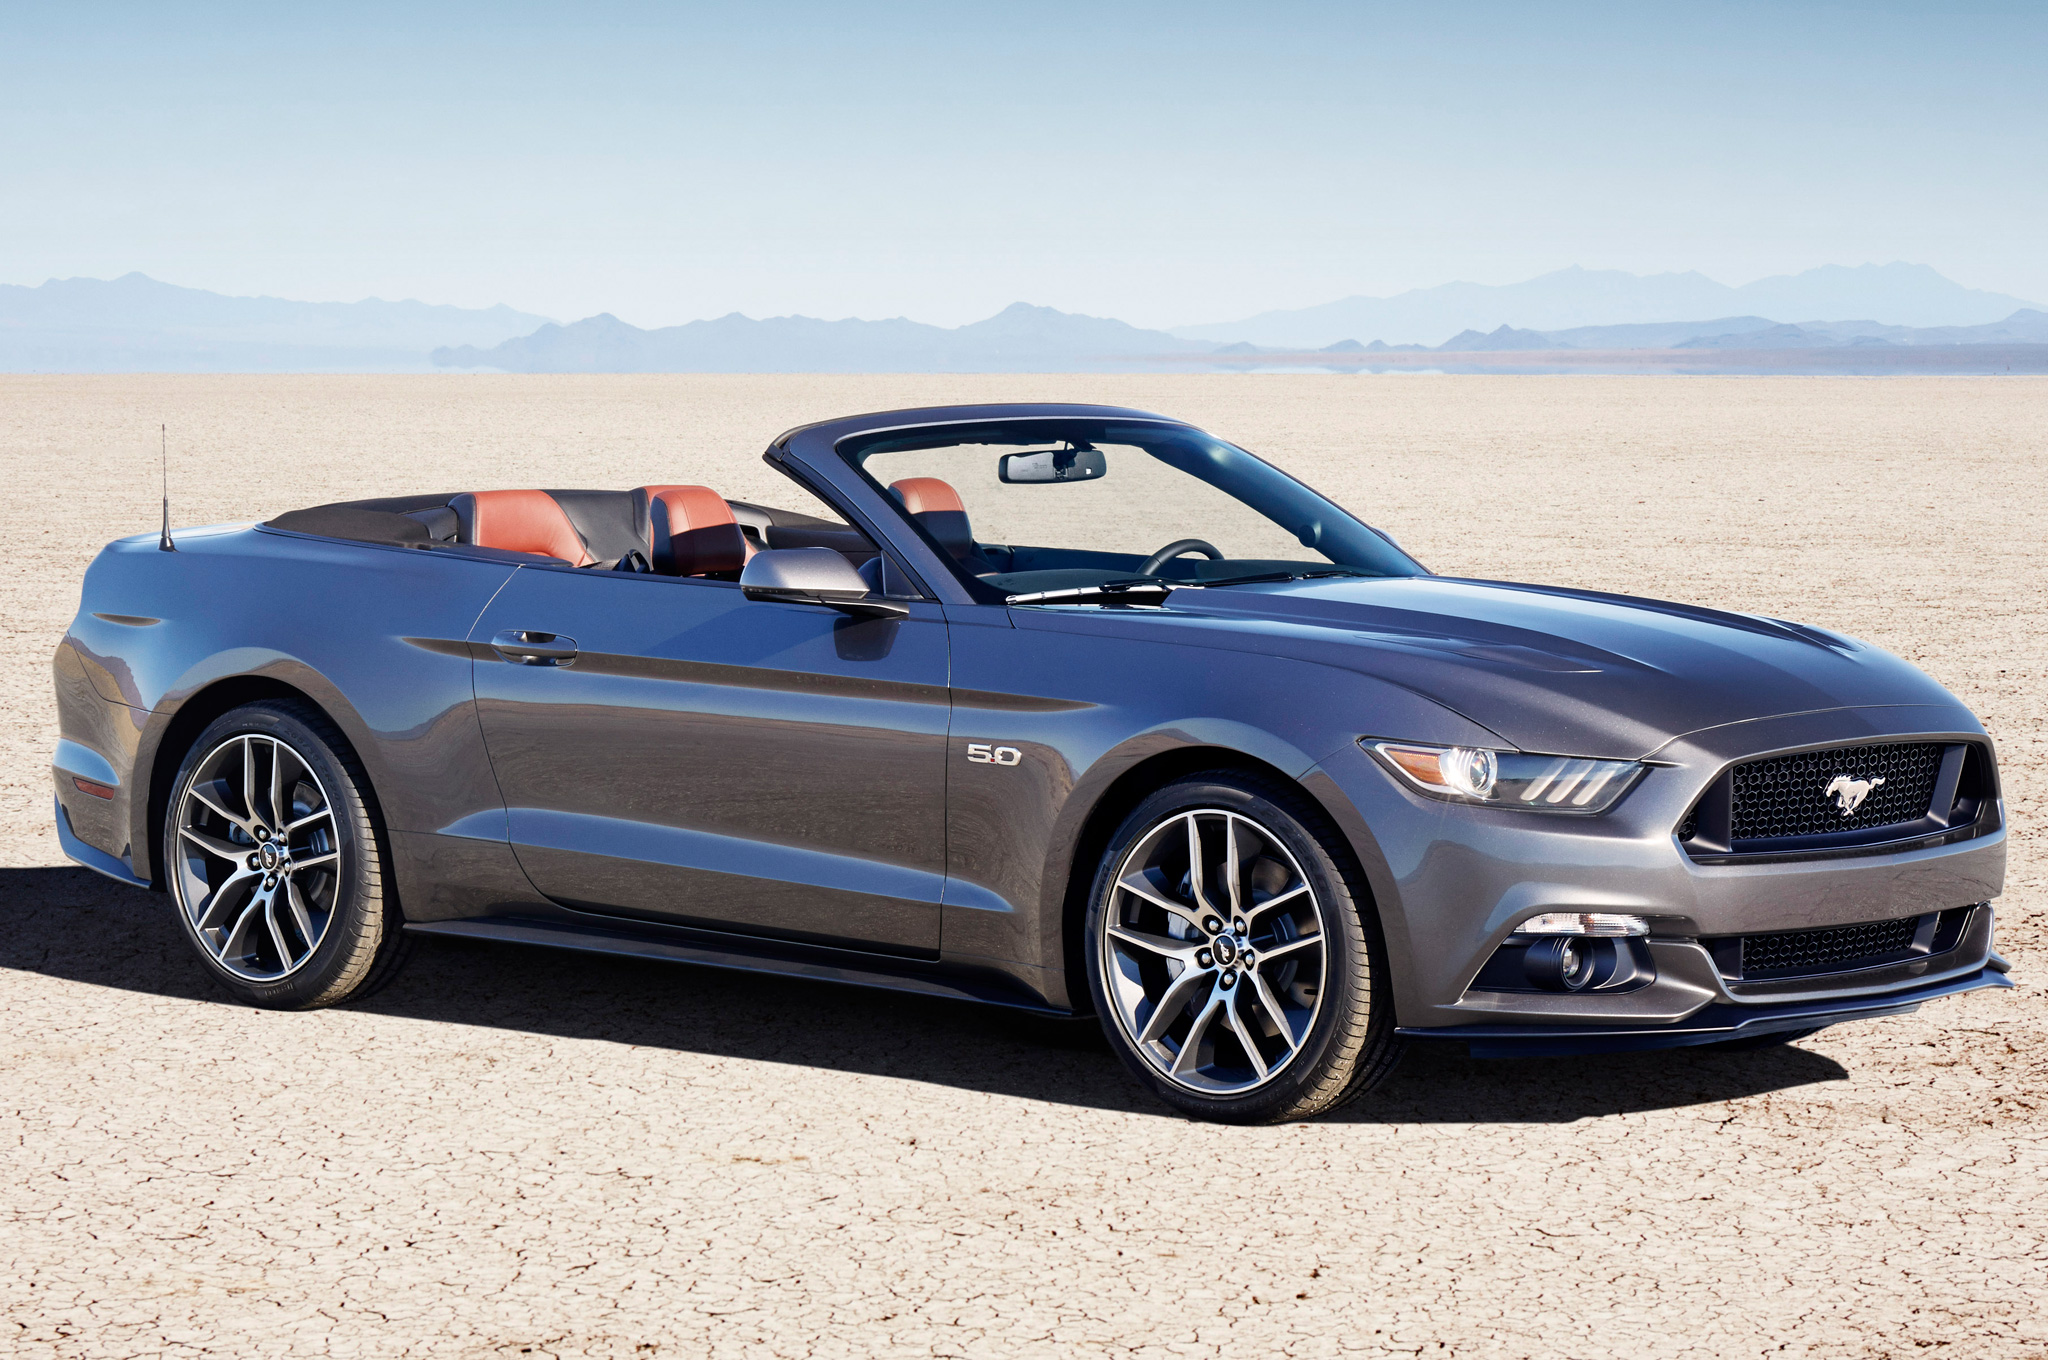 2015 Ford Mustang GT Pics, Vehicles Collection